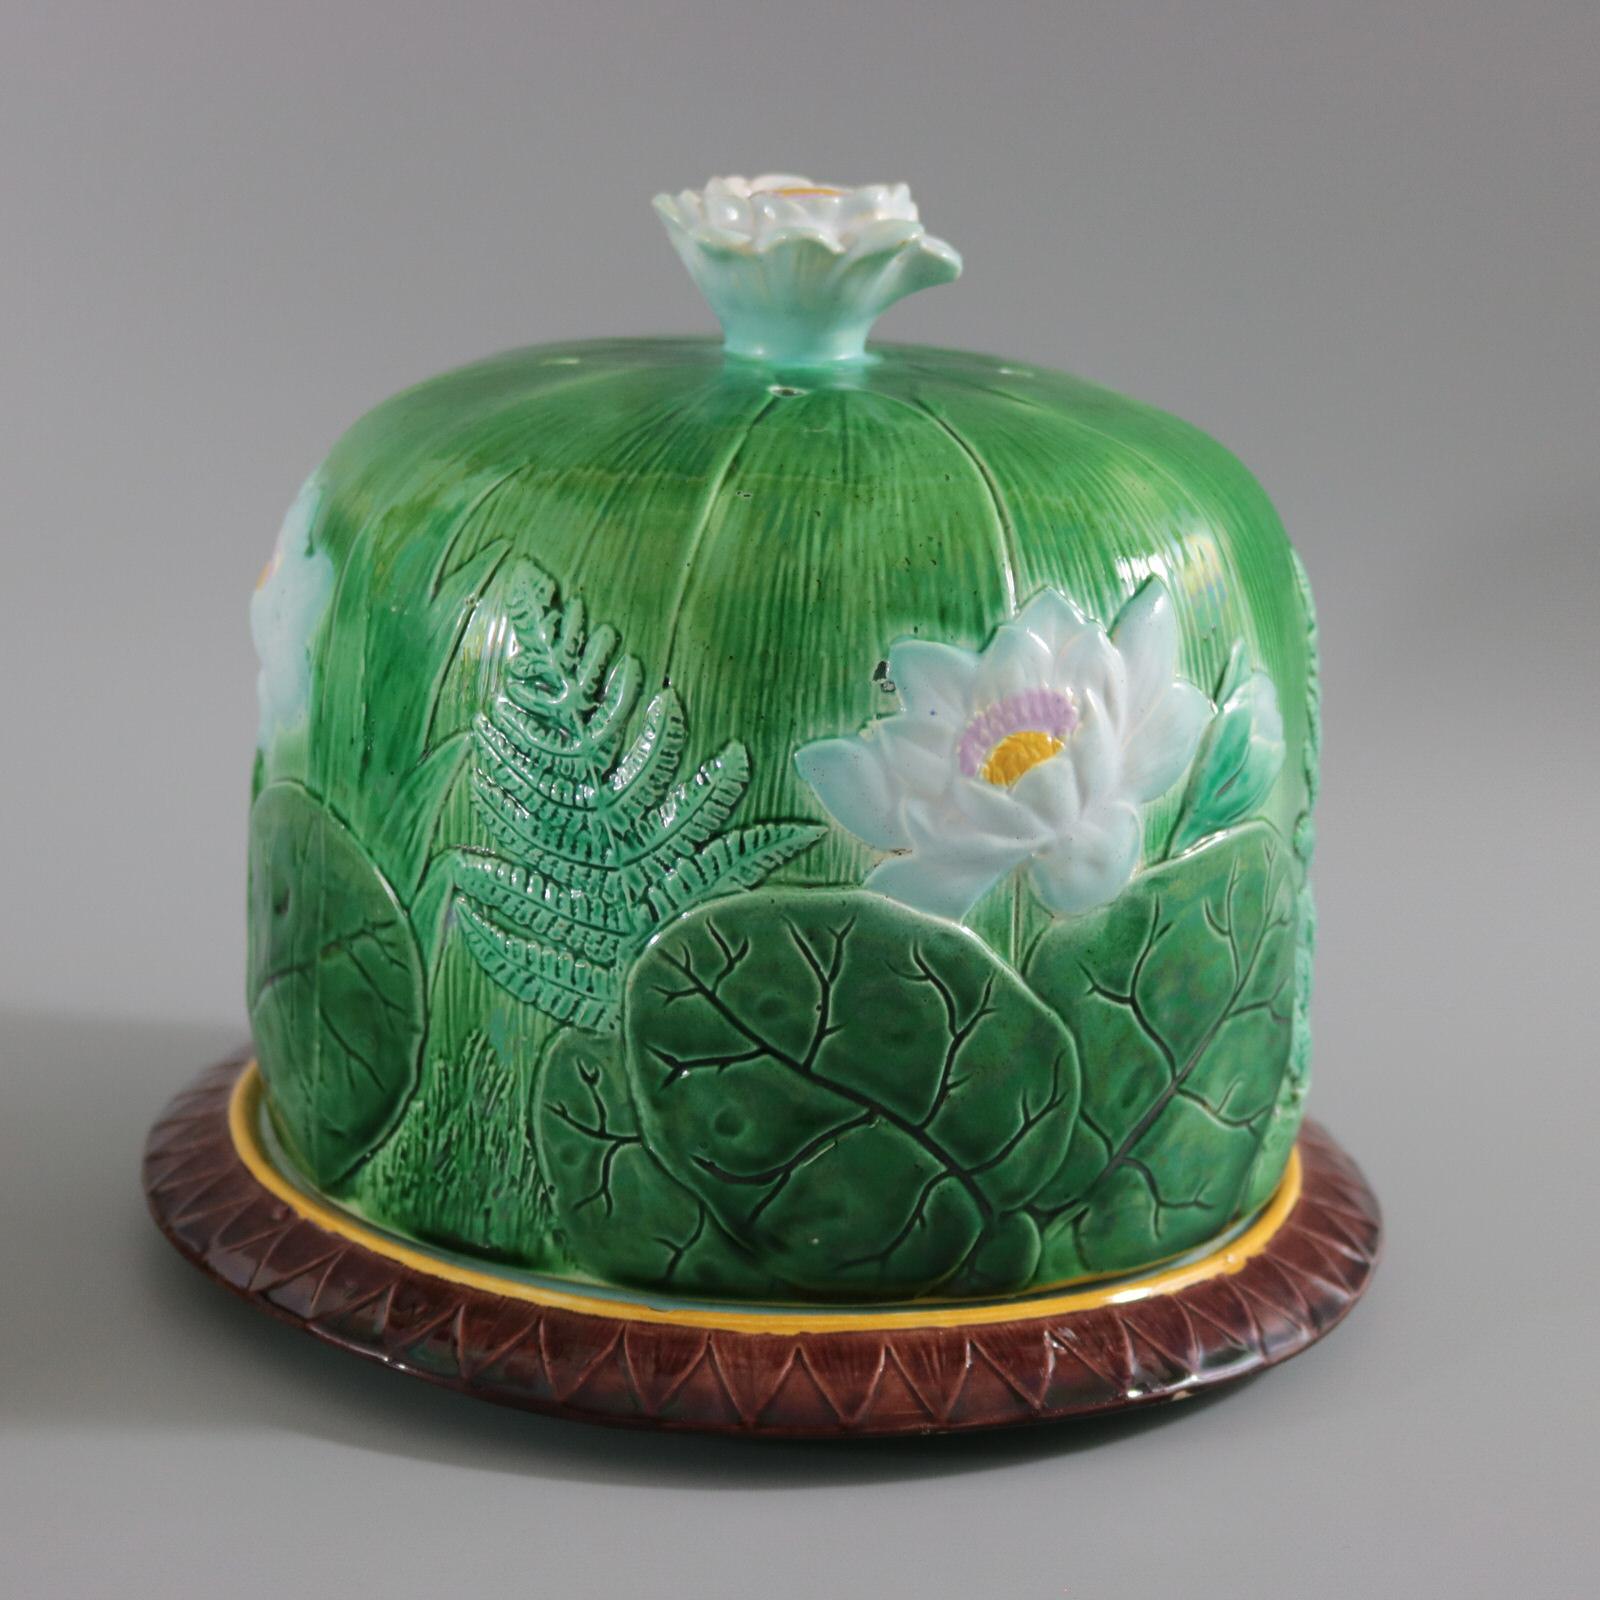 British Holdcroft Majolica Pond Lily Cheese Dome and Stand